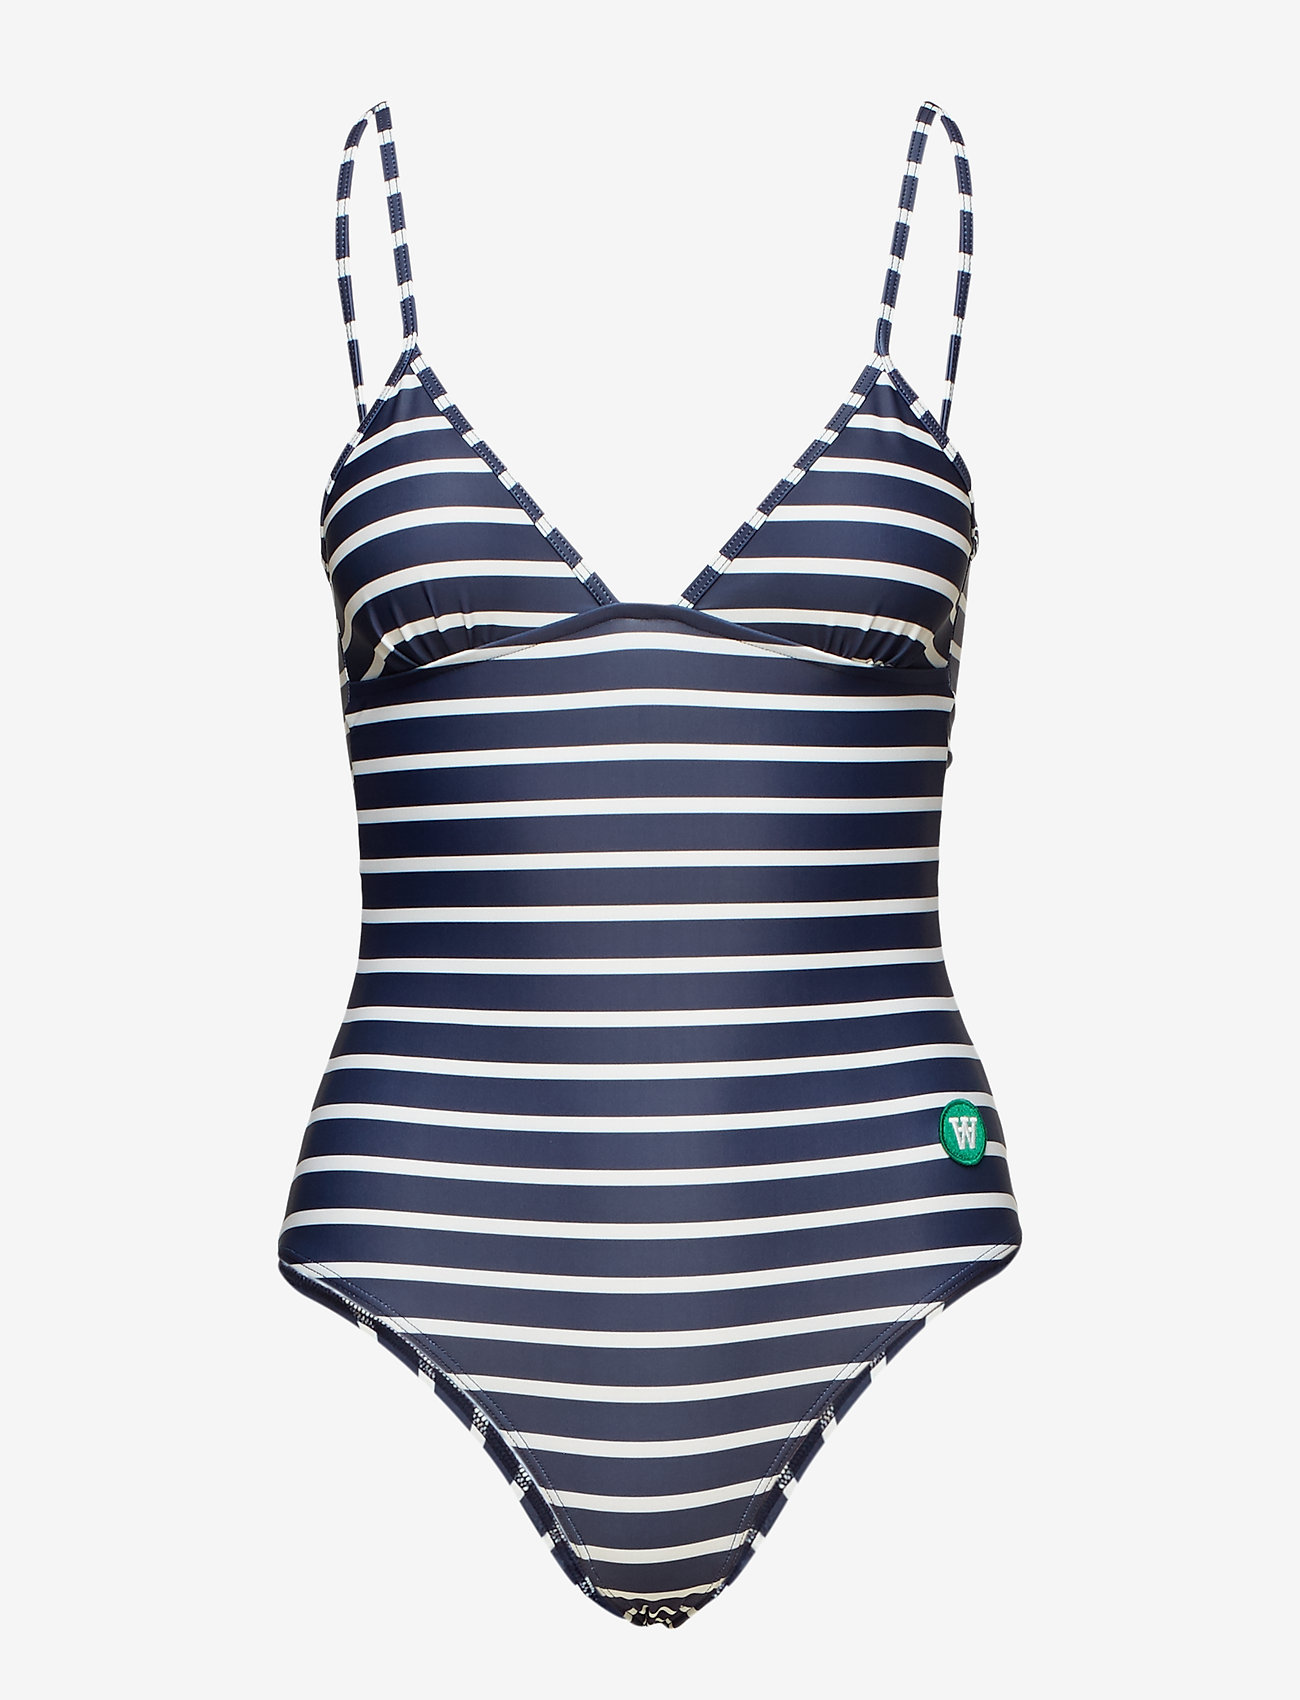 Double A by Wood Wood - Rio swimsuit - badeanzüge - navy/offwhite stripe - 0